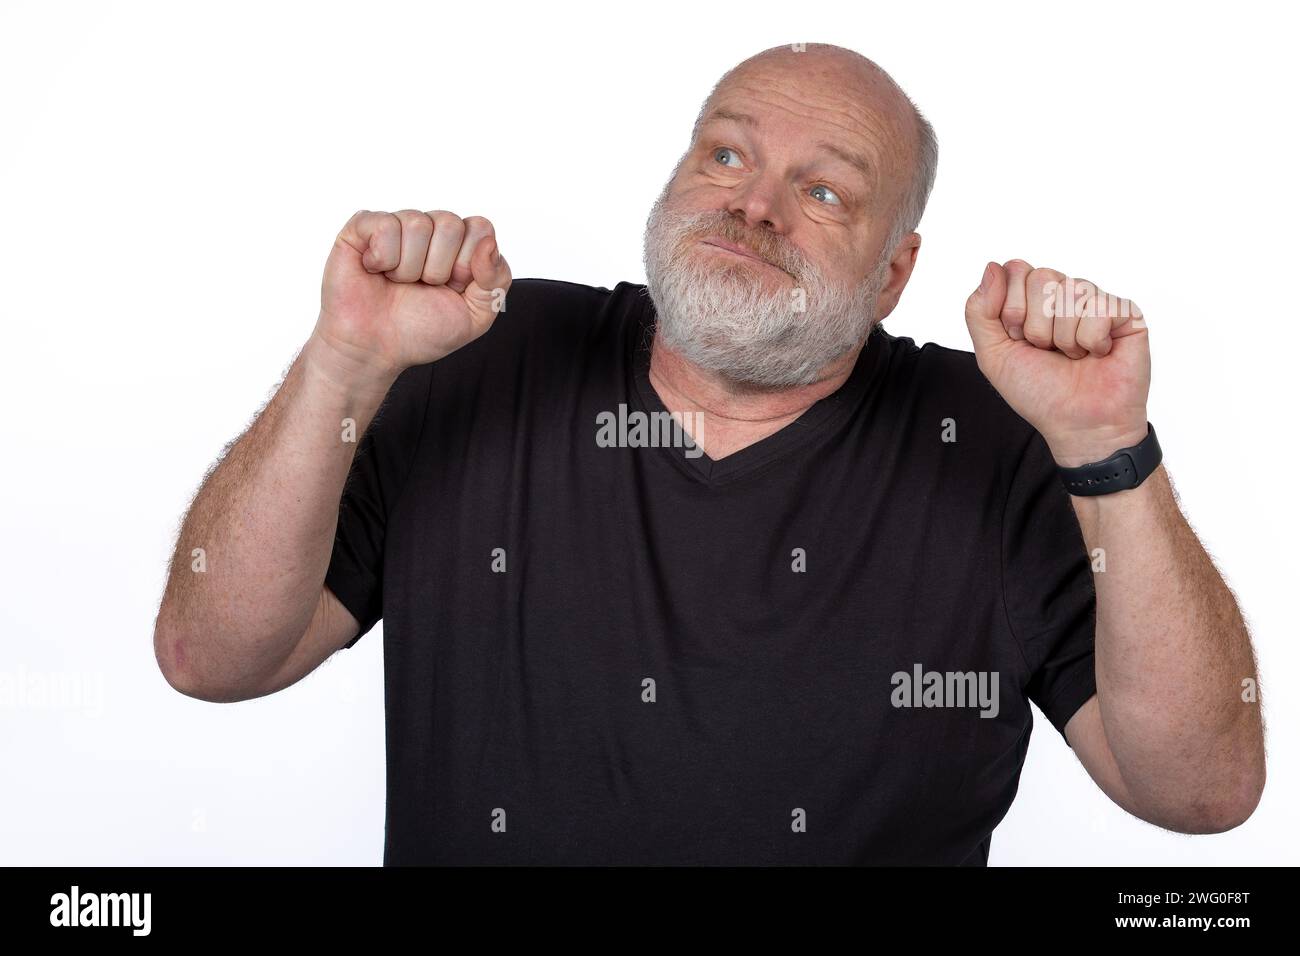 Middle-Aged Man Expressing Discomfort and Stress with Clenched Fists, Health Concept on White Background. Stock Photo